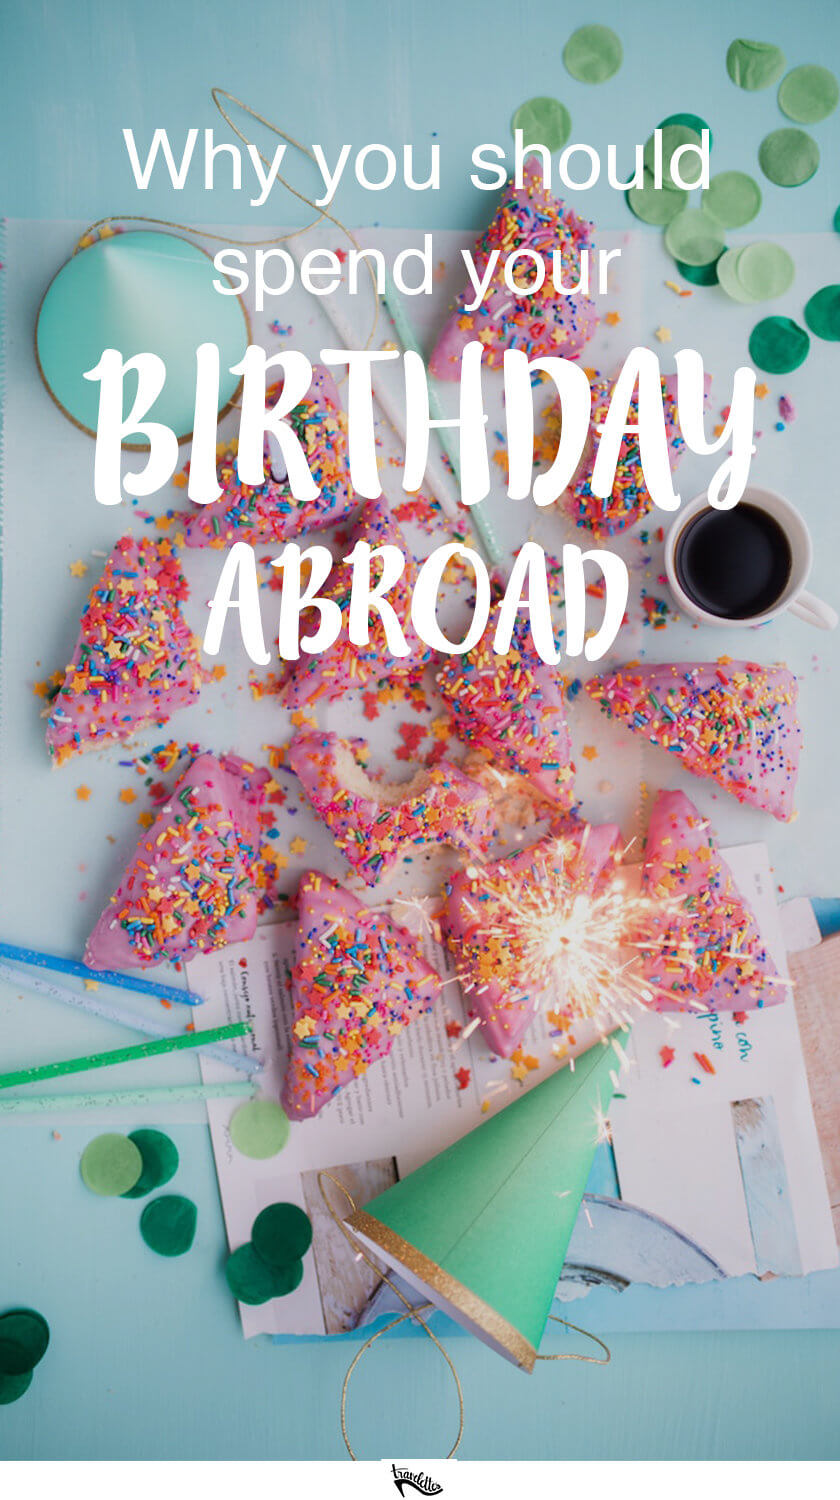 Treat yourself to some me-time and spend your next birthday abroad!